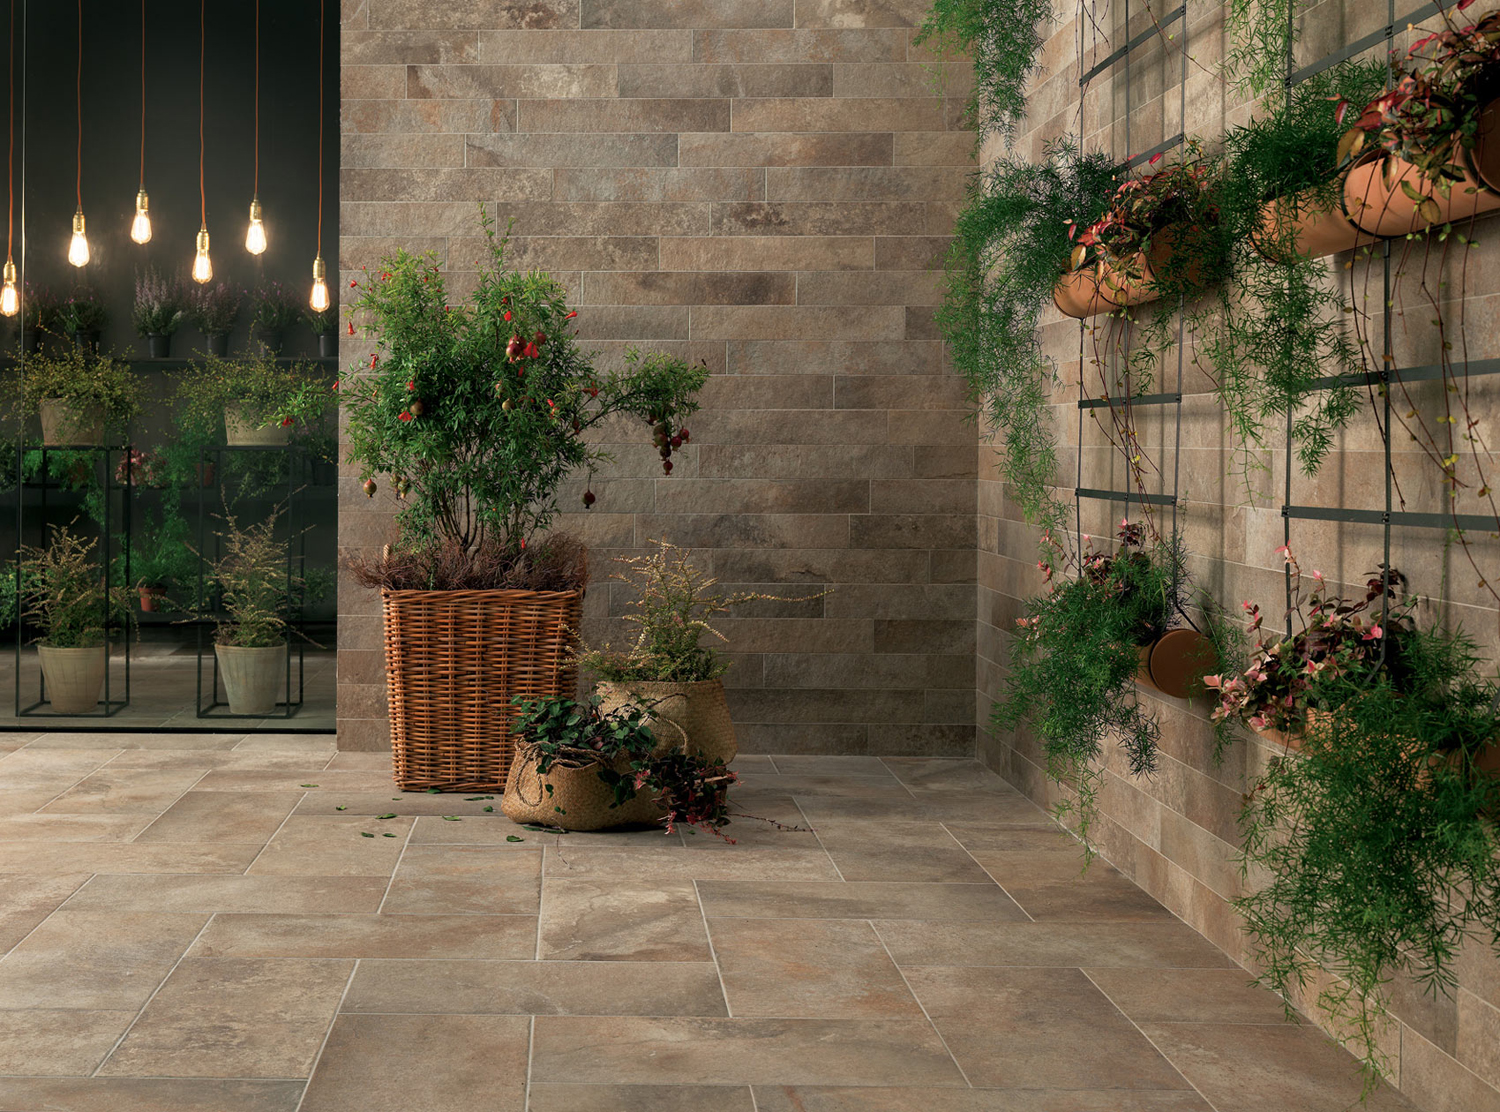 Outside Wall Tiles For Home - fpvwfwlp